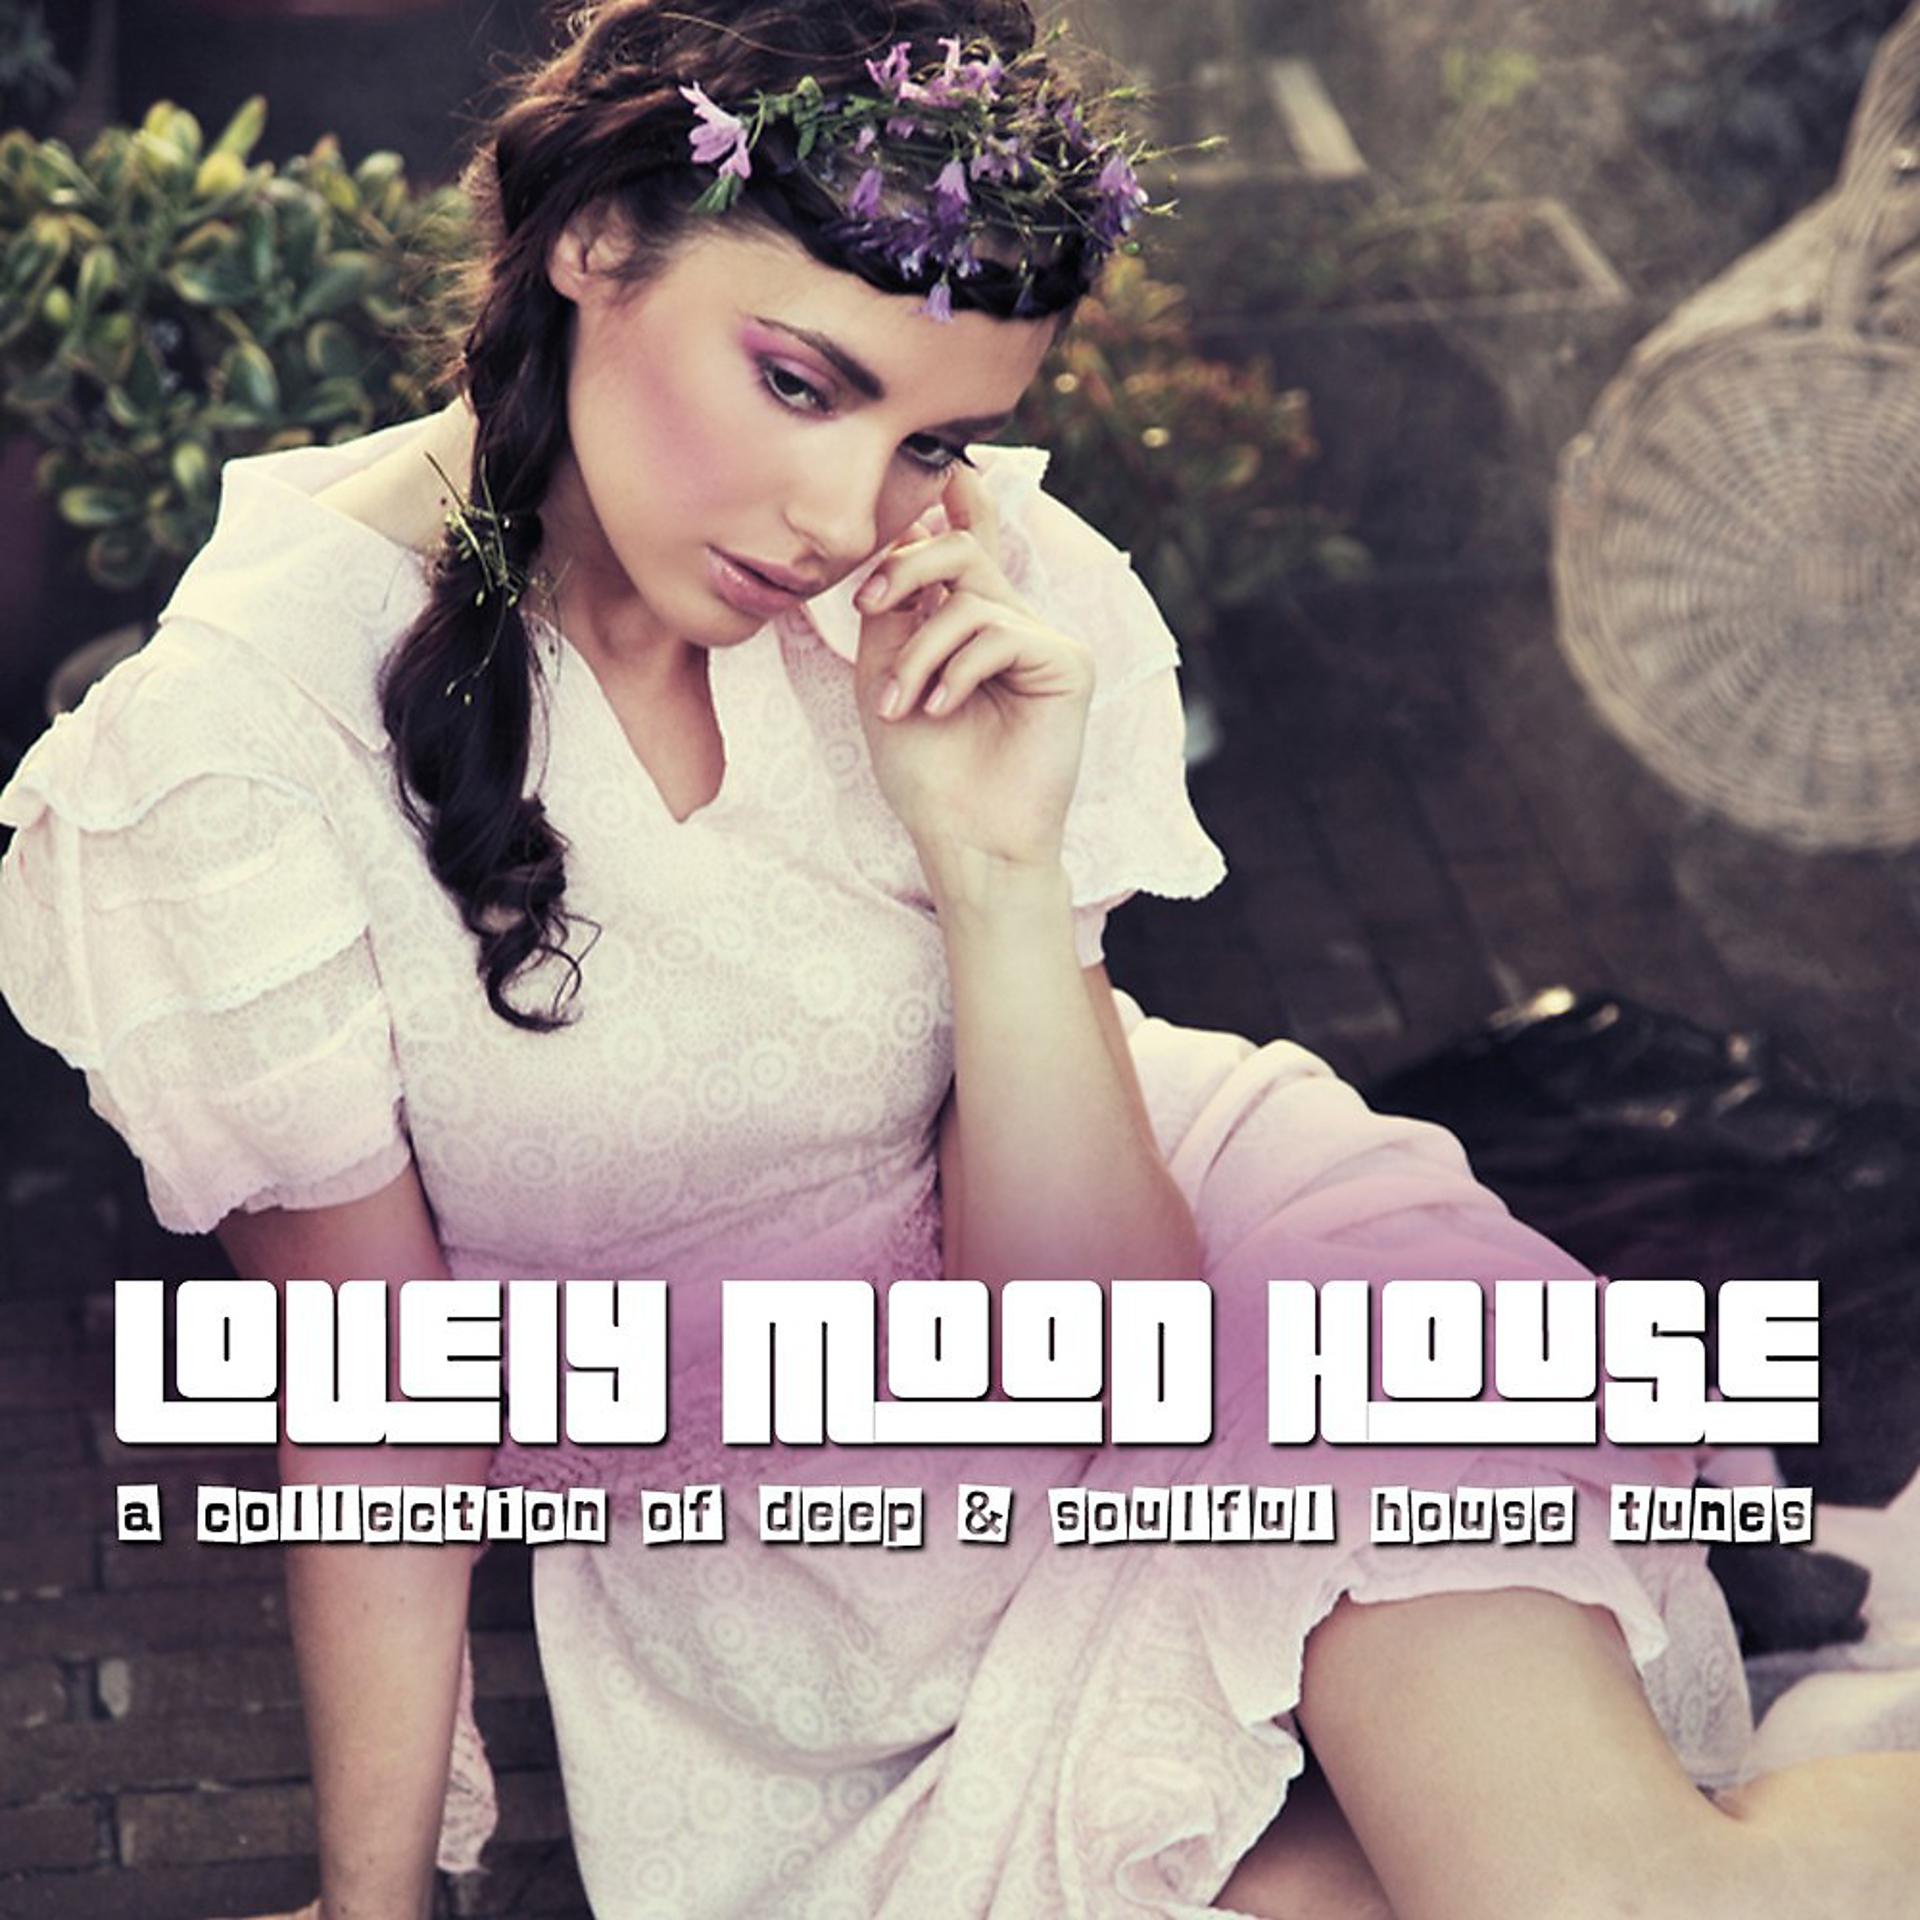 Постер альбома Lovely Mood House 2 - A Collection of Deep & Soulful House Tunes